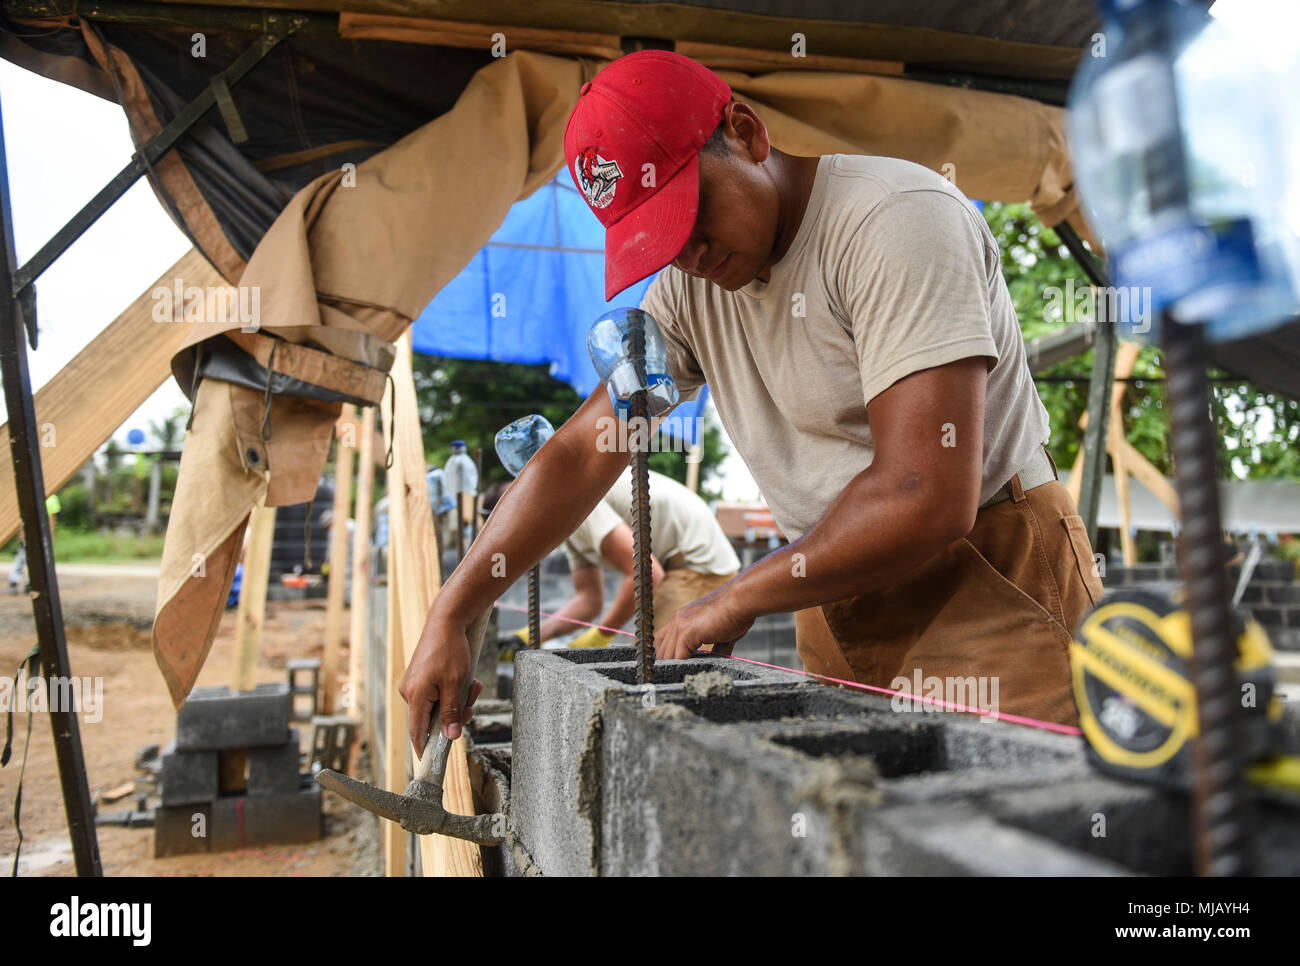 U.S. Air Force Staff Sgt. Jorge Meza, 346th Air Expeditionary Group Rapid Engineer Deployable Heavy Operational Repair Squadron Engineer member who is deployed from Nellis Air Force Base, Nev., ensures a concert block is placed correctly April 27, 2018 at a construction site in Meteti, Panama. Meza is participating in Exercise New Horizons 2018, which is a joint training exercise where U.S. military members conduct training in civil engineer, medical, and support services while benefiting the local community. (U.S. Air Force photo by Senior Airman Dustin Mullen/Released) Stock Photo